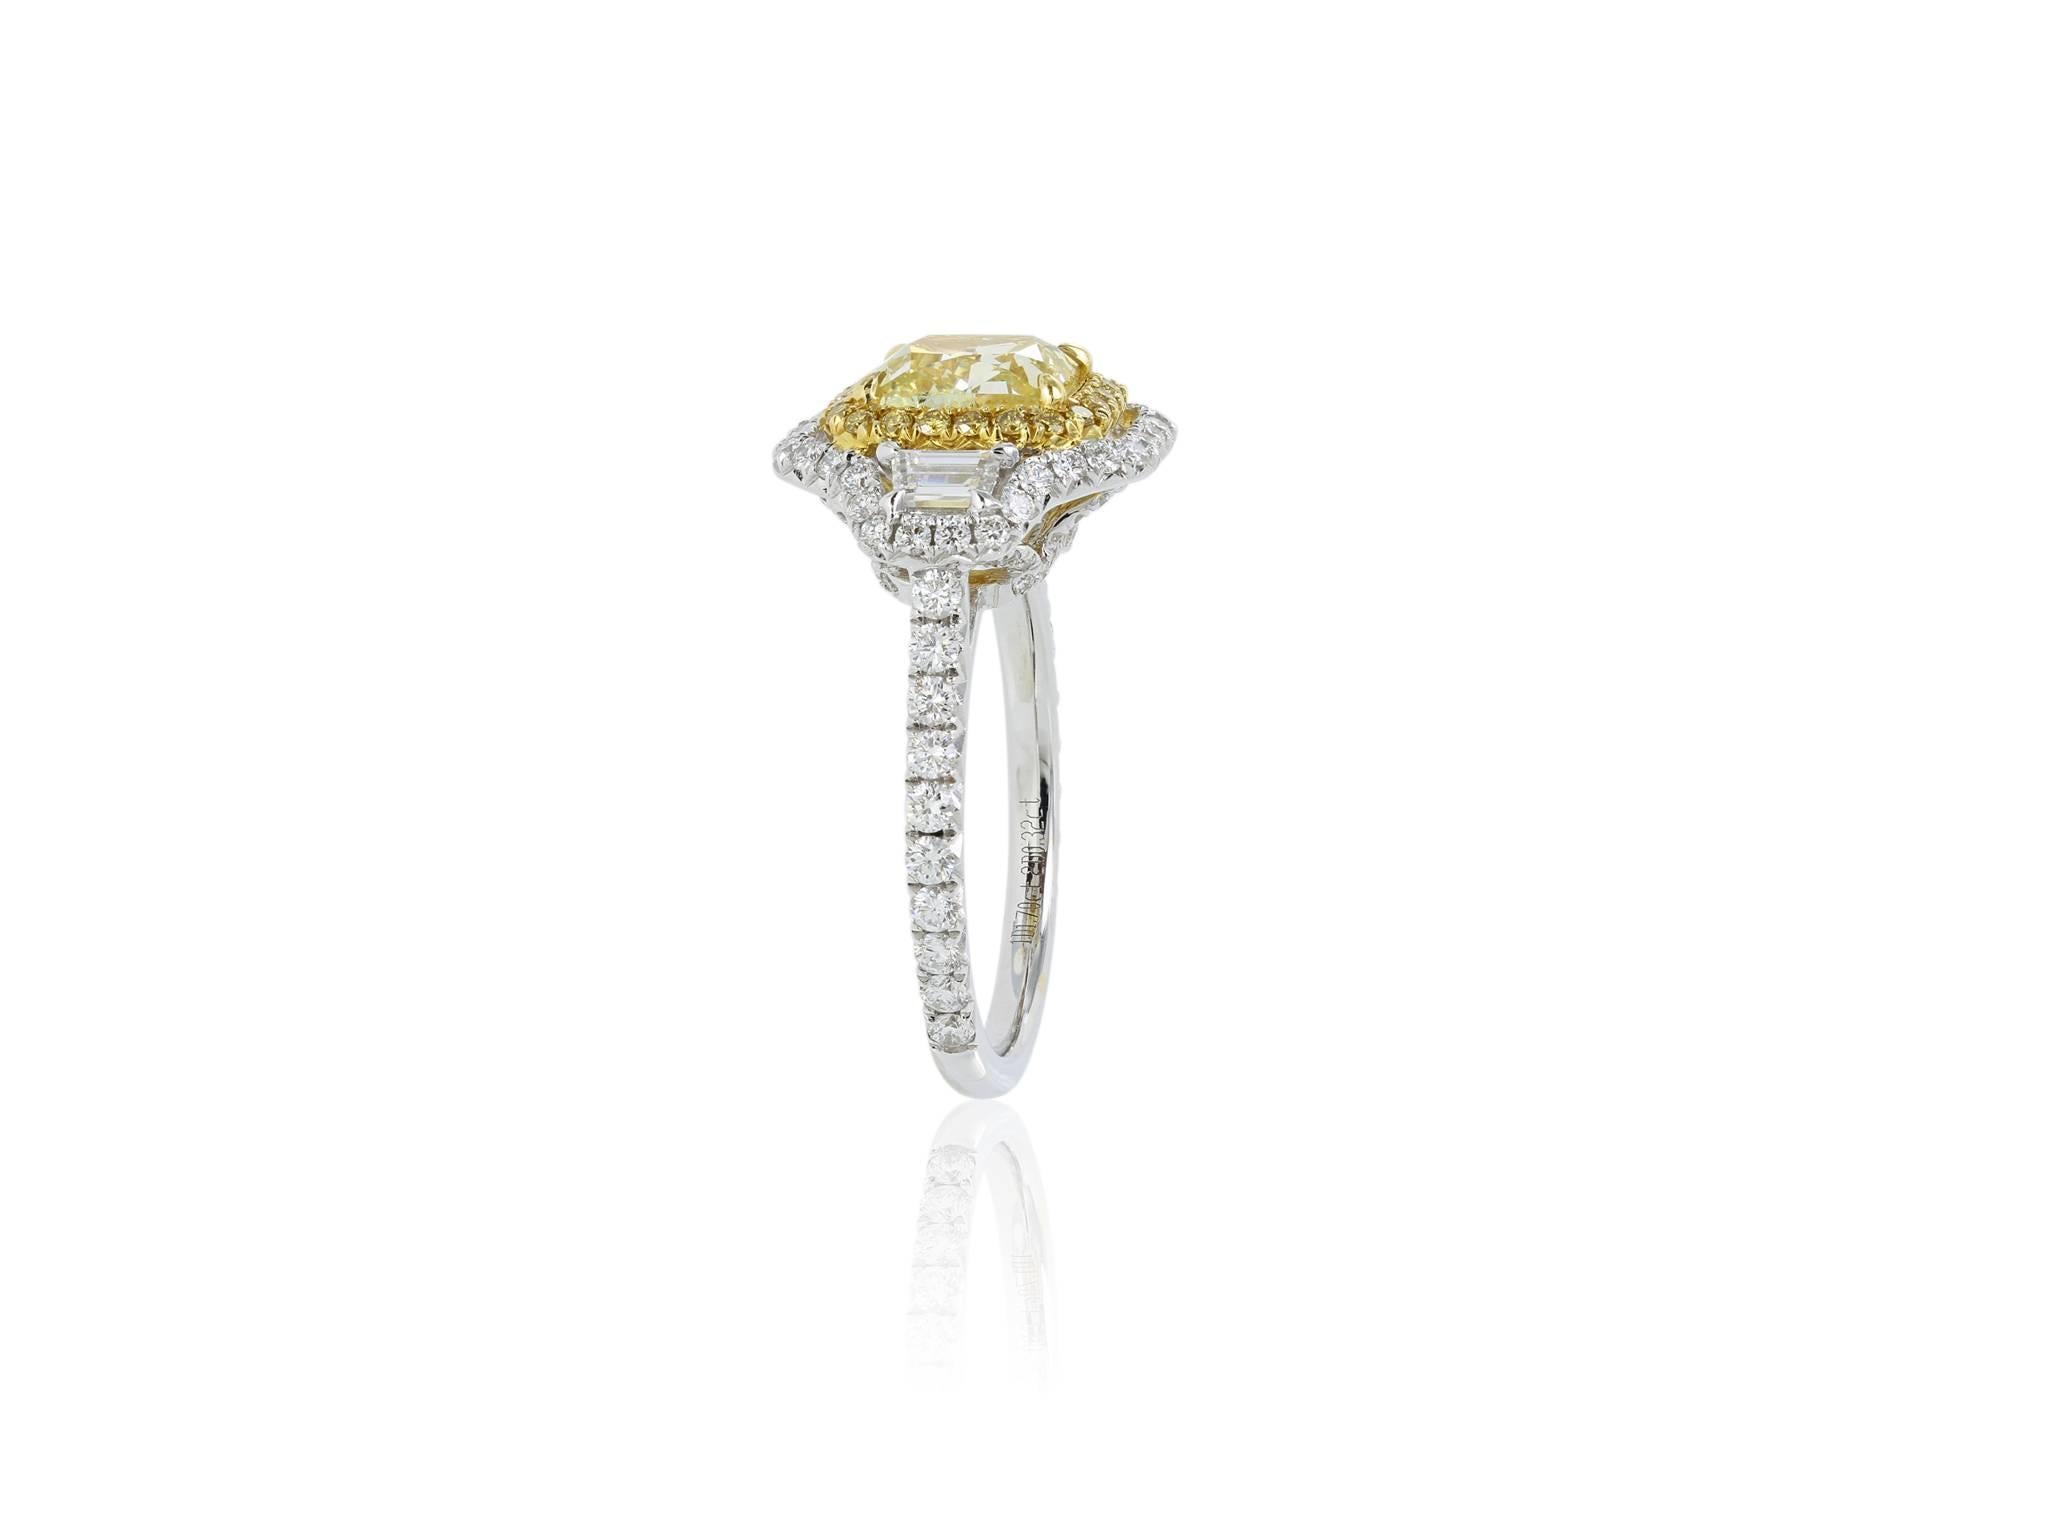 18 karat two tone ladies Canary Diamond ring featuring one rectangle radiant cut diamond weighing 1.70 carats with a GIA certificate Fancy yellow SI1, respectively flanked by 2 trapzoid diamonds, with a halo of diamonds and diamonds set on the shank